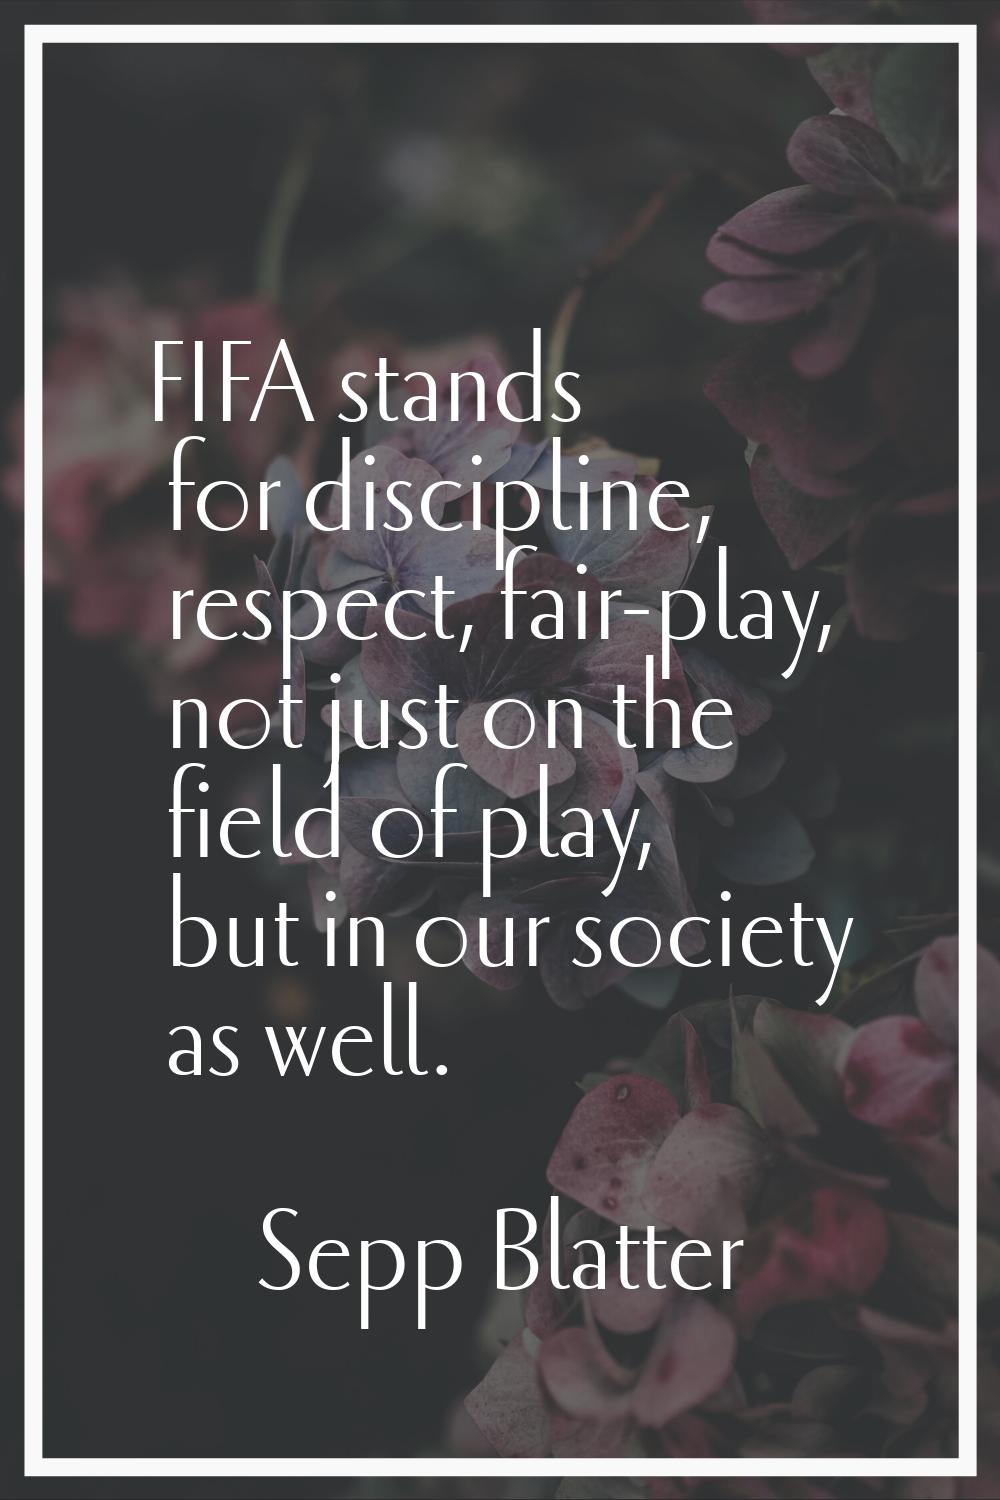 FIFA stands for discipline, respect, fair-play, not just on the field of play, but in our society a